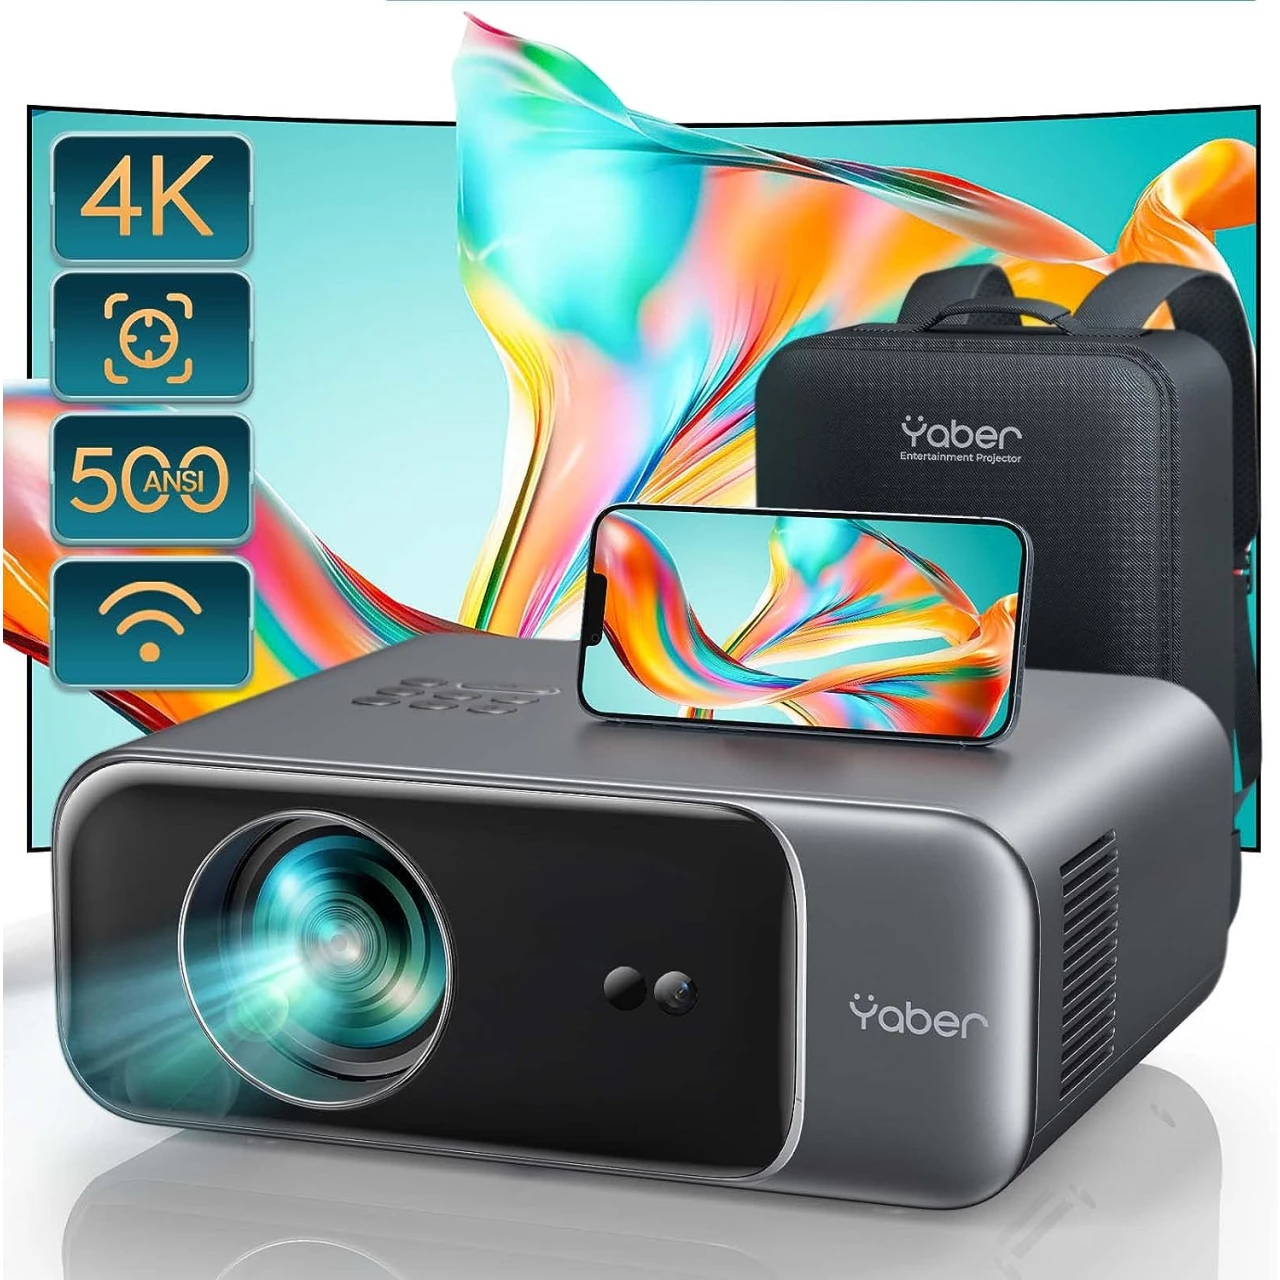 [𝑨𝒖𝒕𝒐 𝑭𝒐𝒄𝒖𝒔] YABER Pro V9 4K Projector with WiFi 6 and Bluetooth 5.2, 500 ANSI Native 1080P Outdoor Movie Projector, Auto 6D Keystone &amp; 50% Zoom, Home Theater Projector for Phone/TV Stick/PC